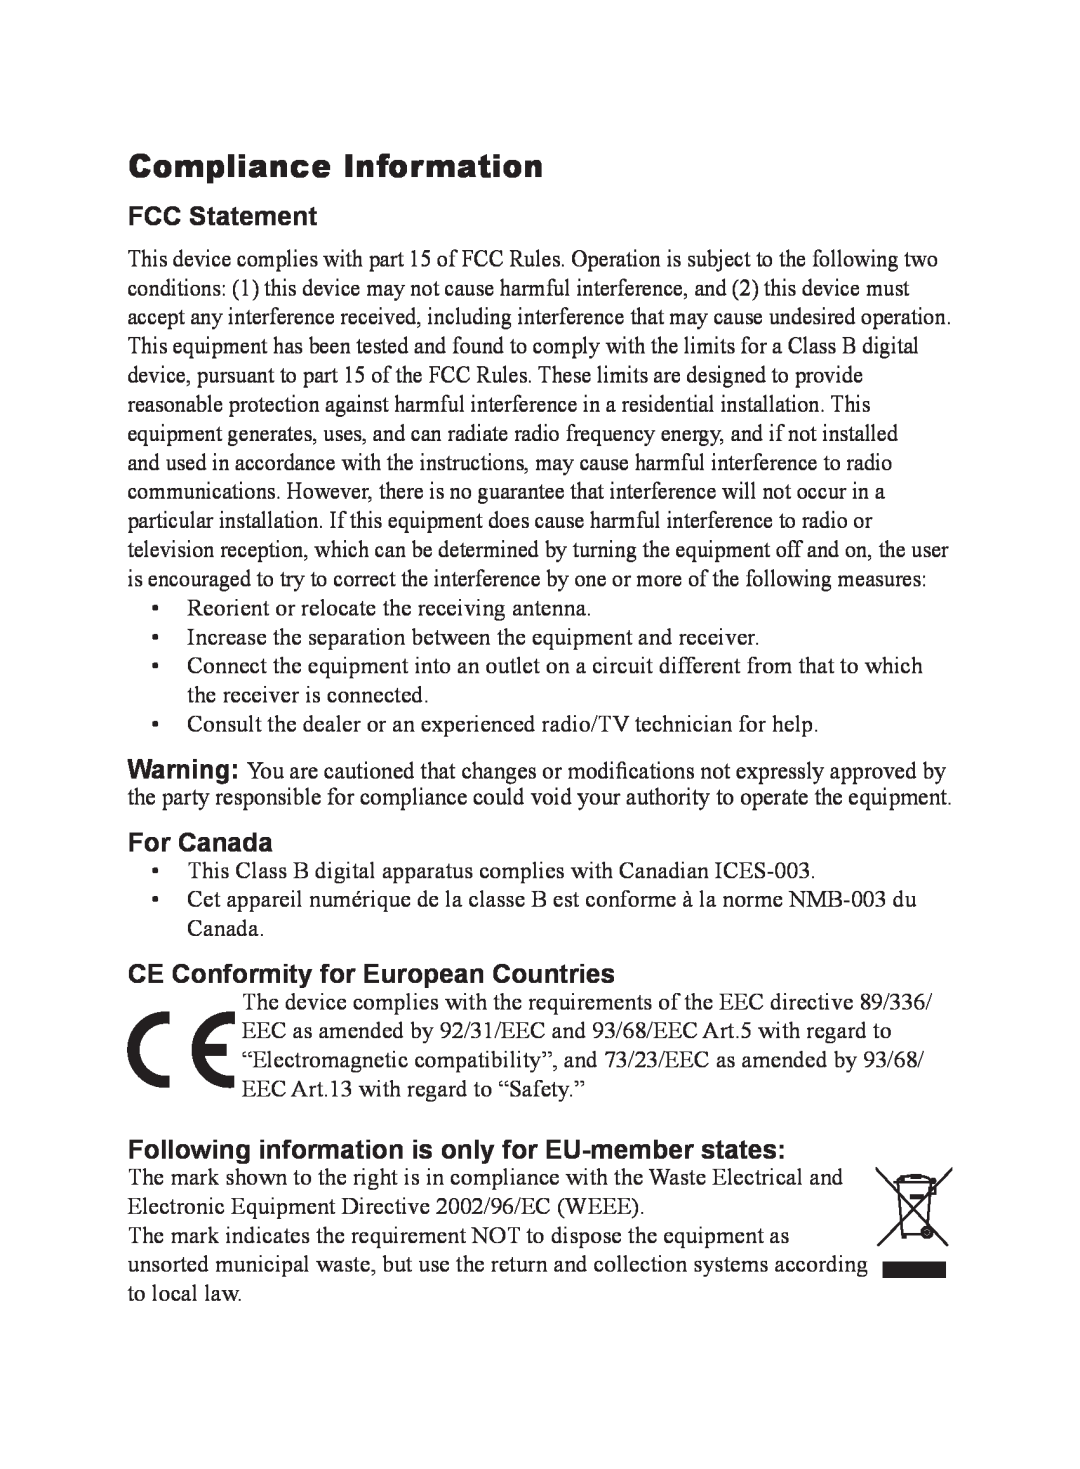 ViewSonic VS10872 manual Compliance Information, FCC Statement, For Canada, CE Conformity for European Countries 